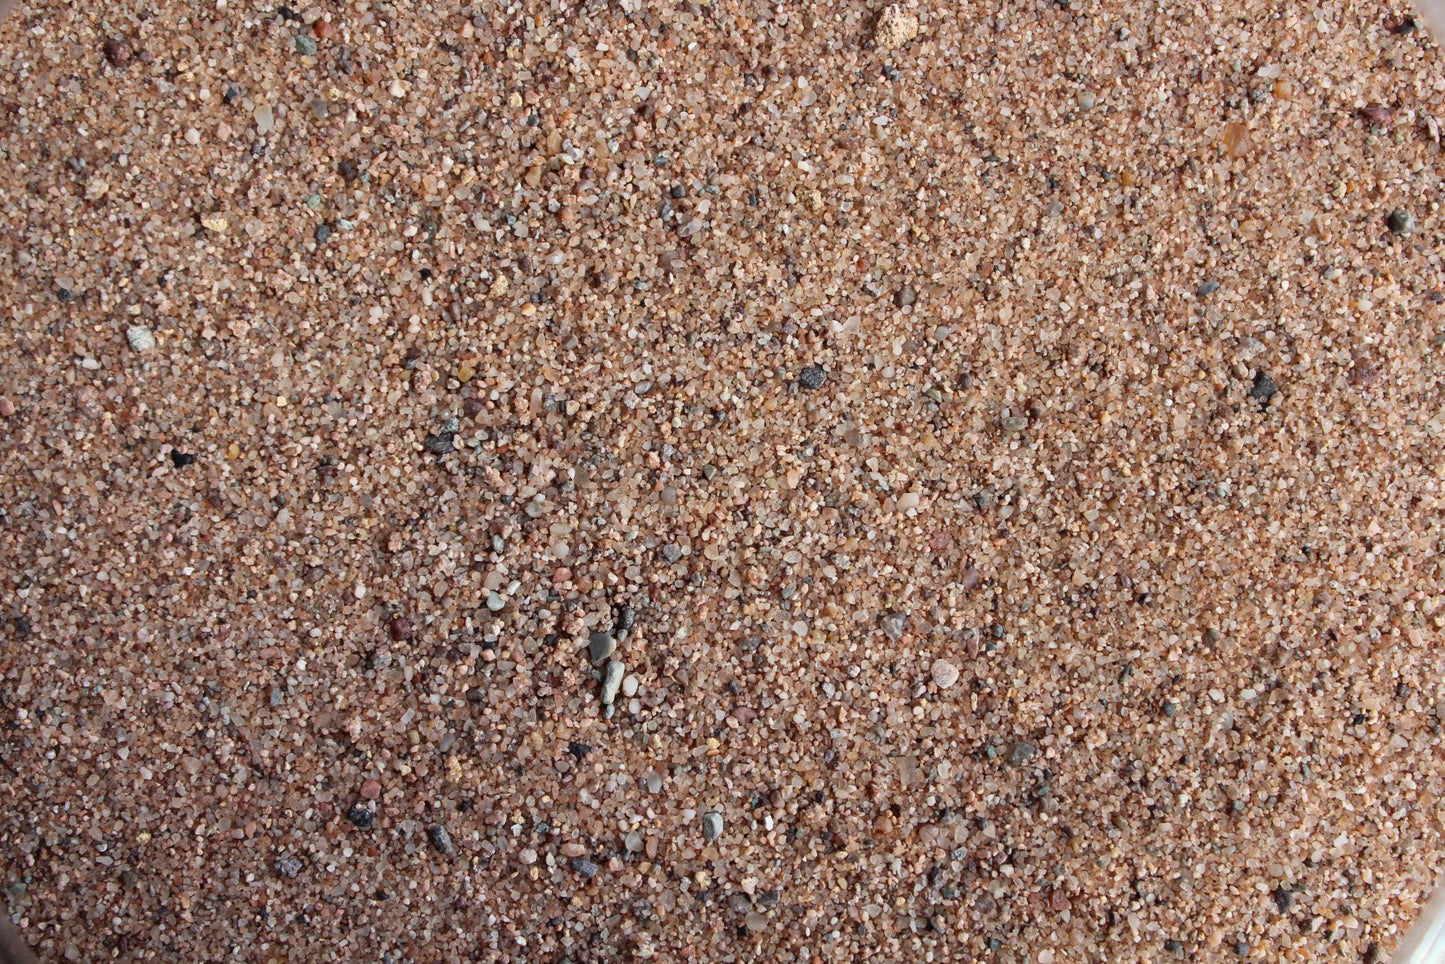 Close-up of fine, beige and brown sand grains. The Brisks Kiln Dried Paving Sand contains tiny pebbles and specks of darker stones scattered throughout, giving it a varied texture. The image captures the intricate details and natural colors of this polished appearance sand.